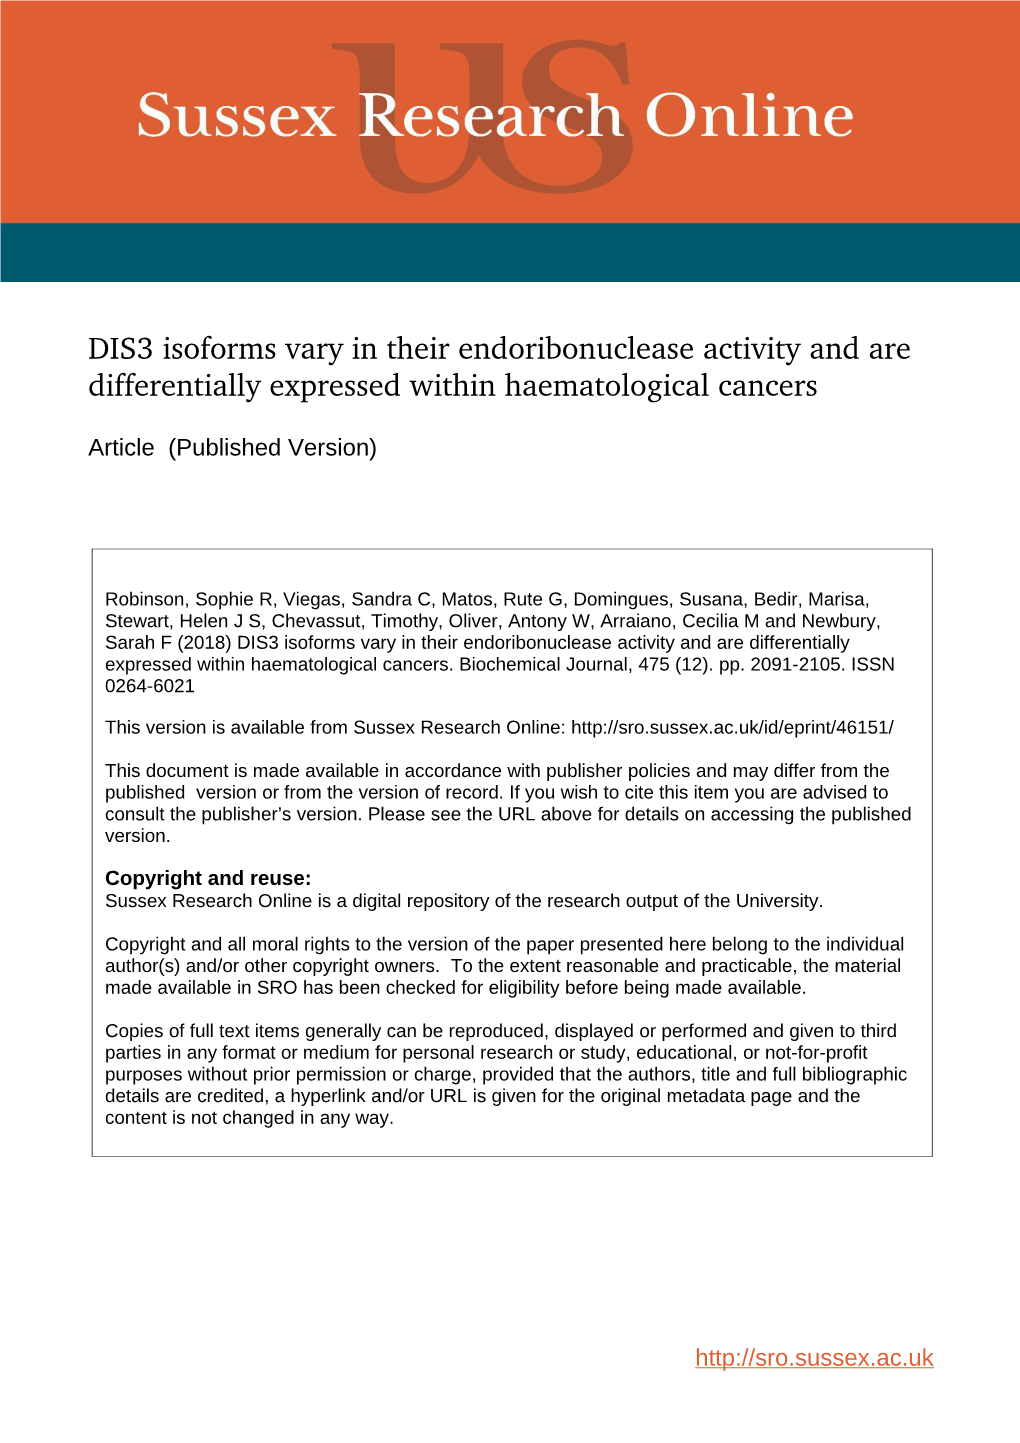 DIS3 Isoforms Vary in Their Endoribonuclease Activity and Are Differentially Expressed Within Haematological Cancers